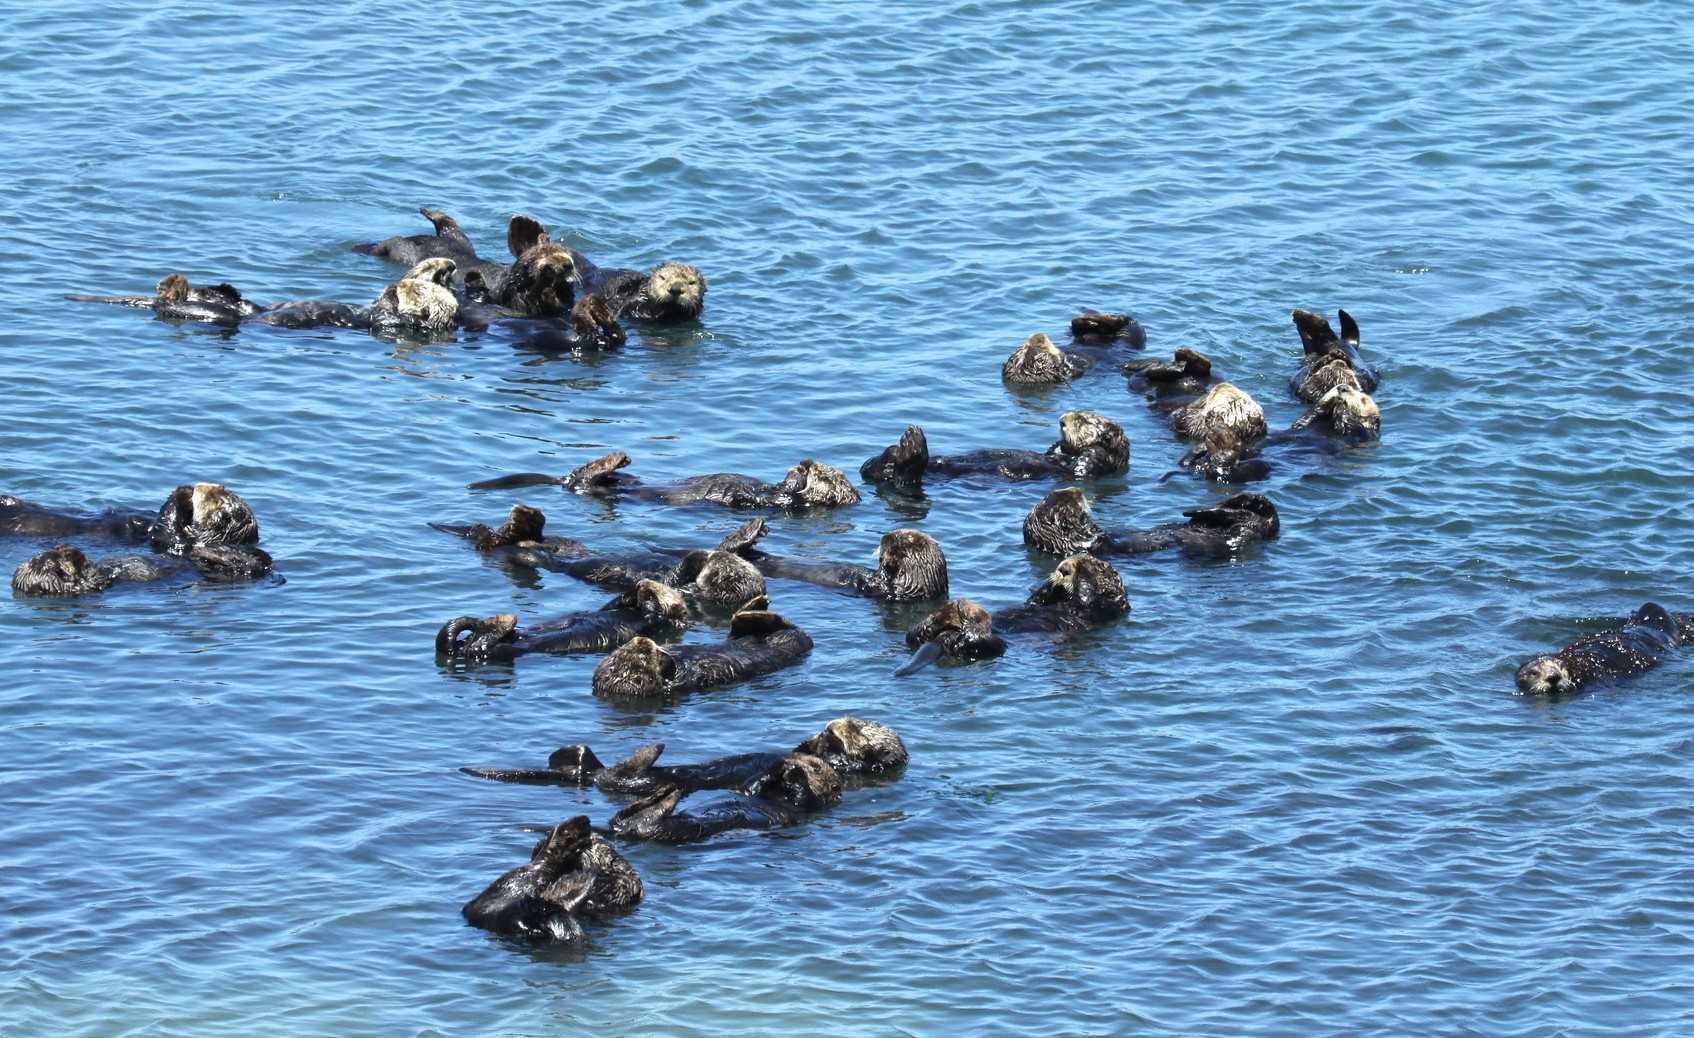 group-of-otters-moss-landing-california-photo-by-lilian-carswell-u.s.-fish-and-wildlife-service_1.jpg